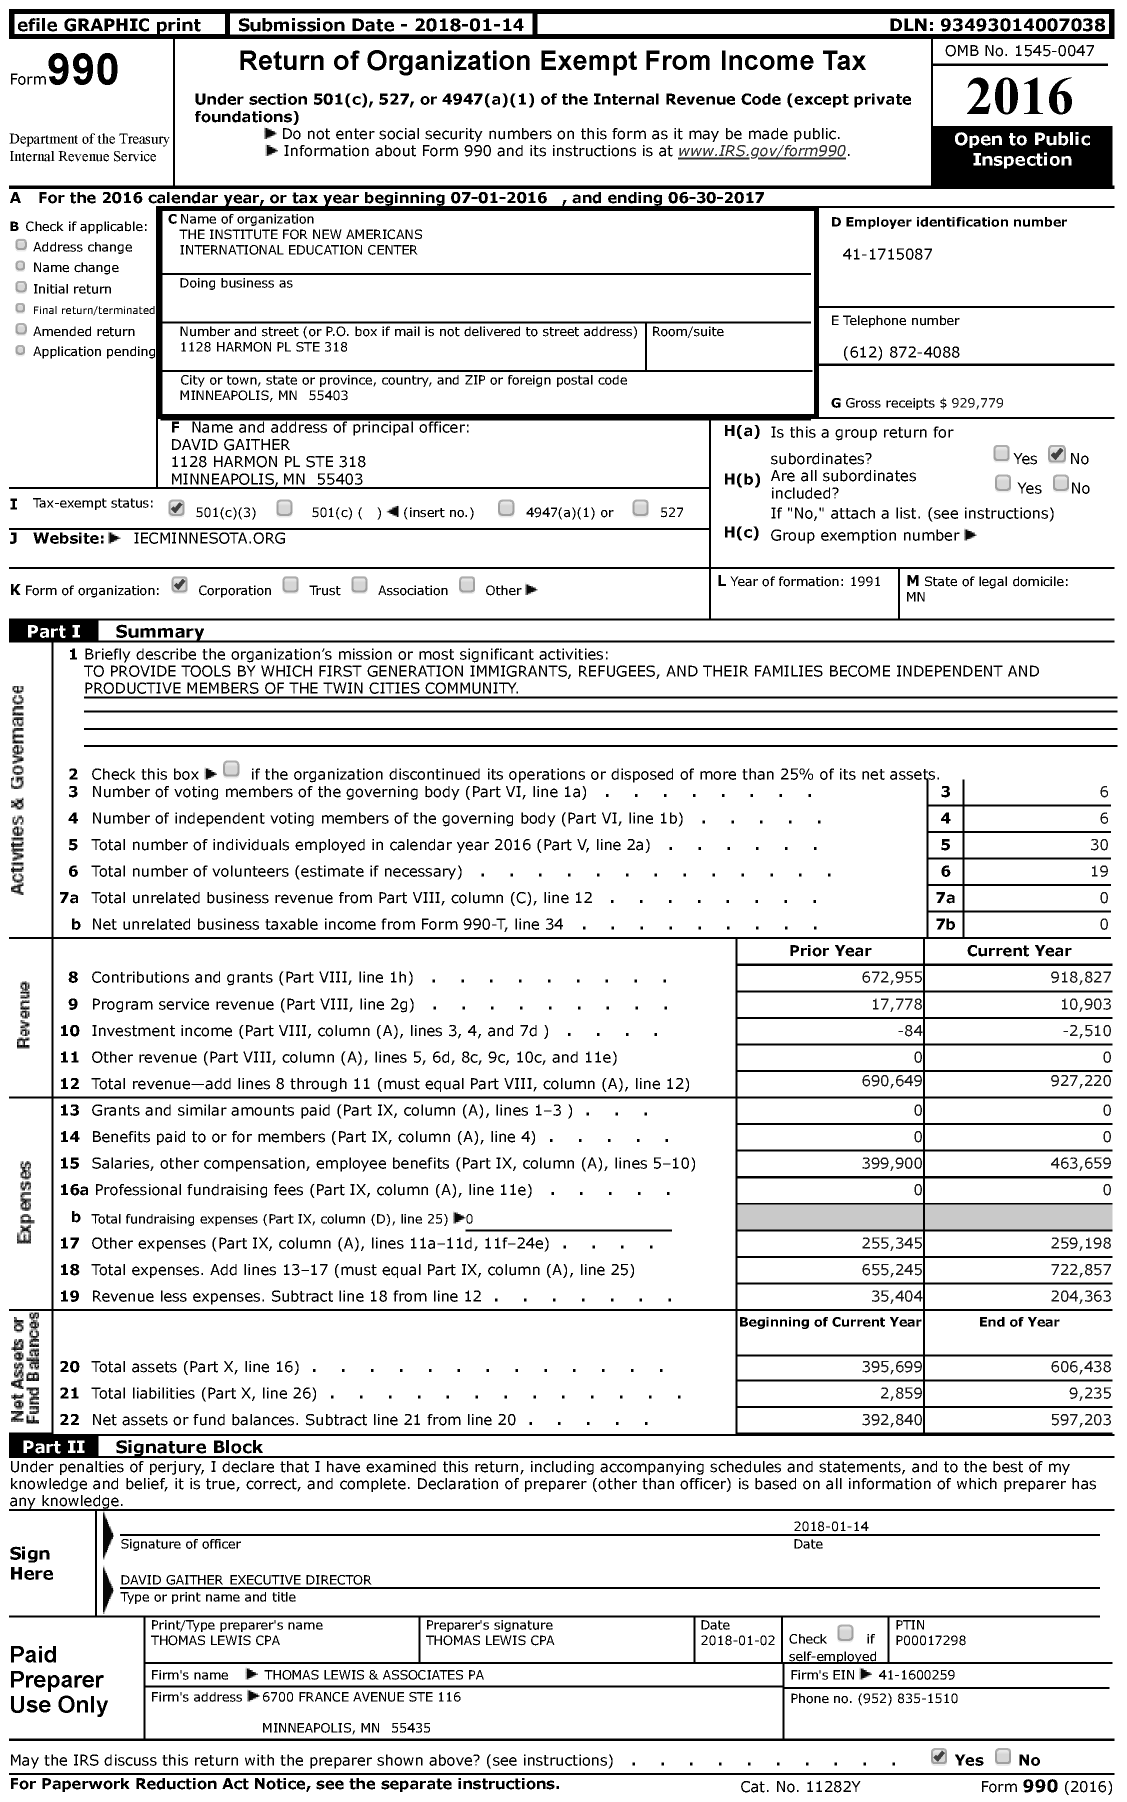 Image of first page of 2016 Form 990 for The Institute for New Americans International Education Center